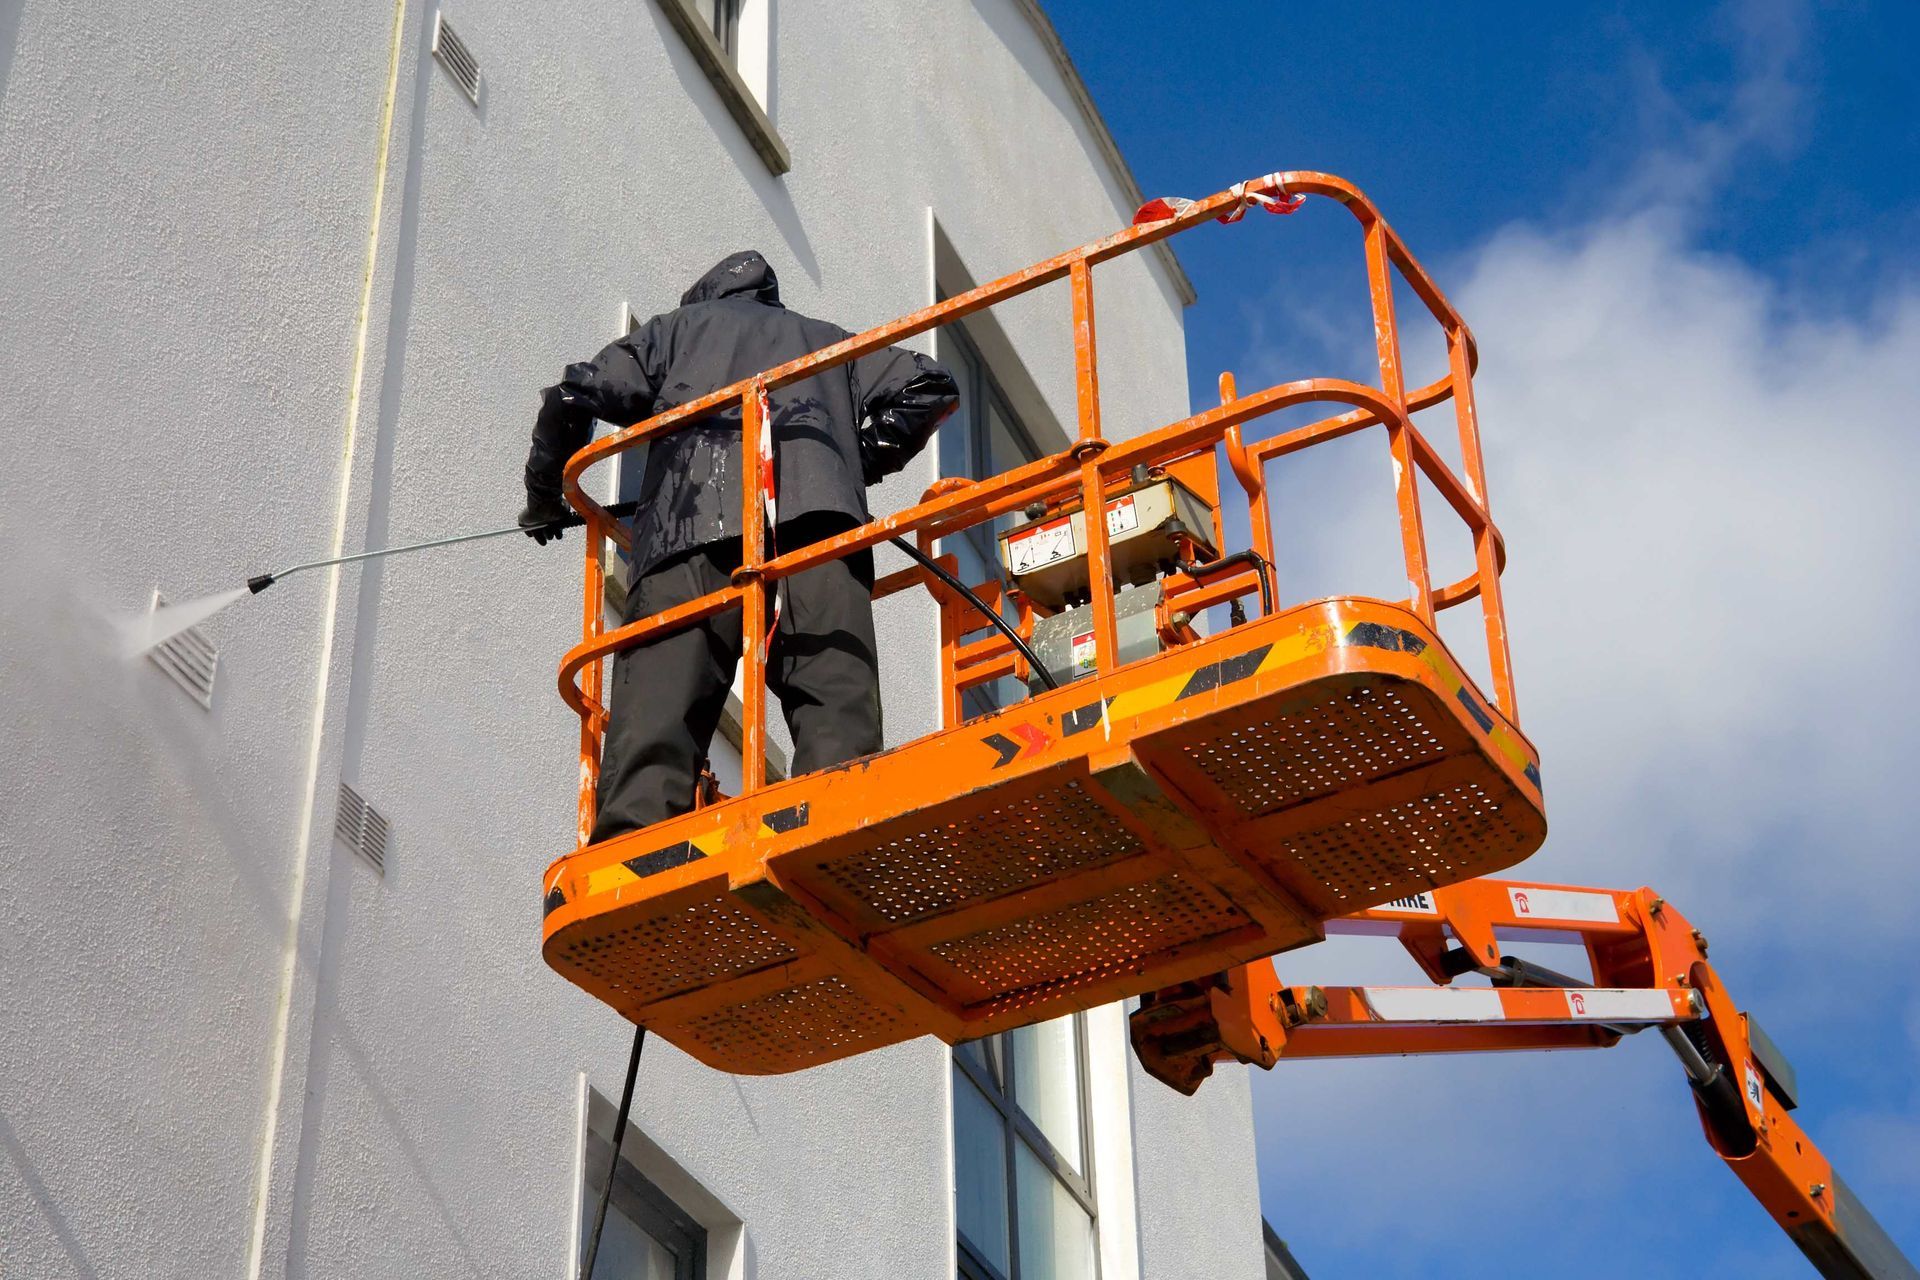 A man is cleaning a building with a high pressure washer